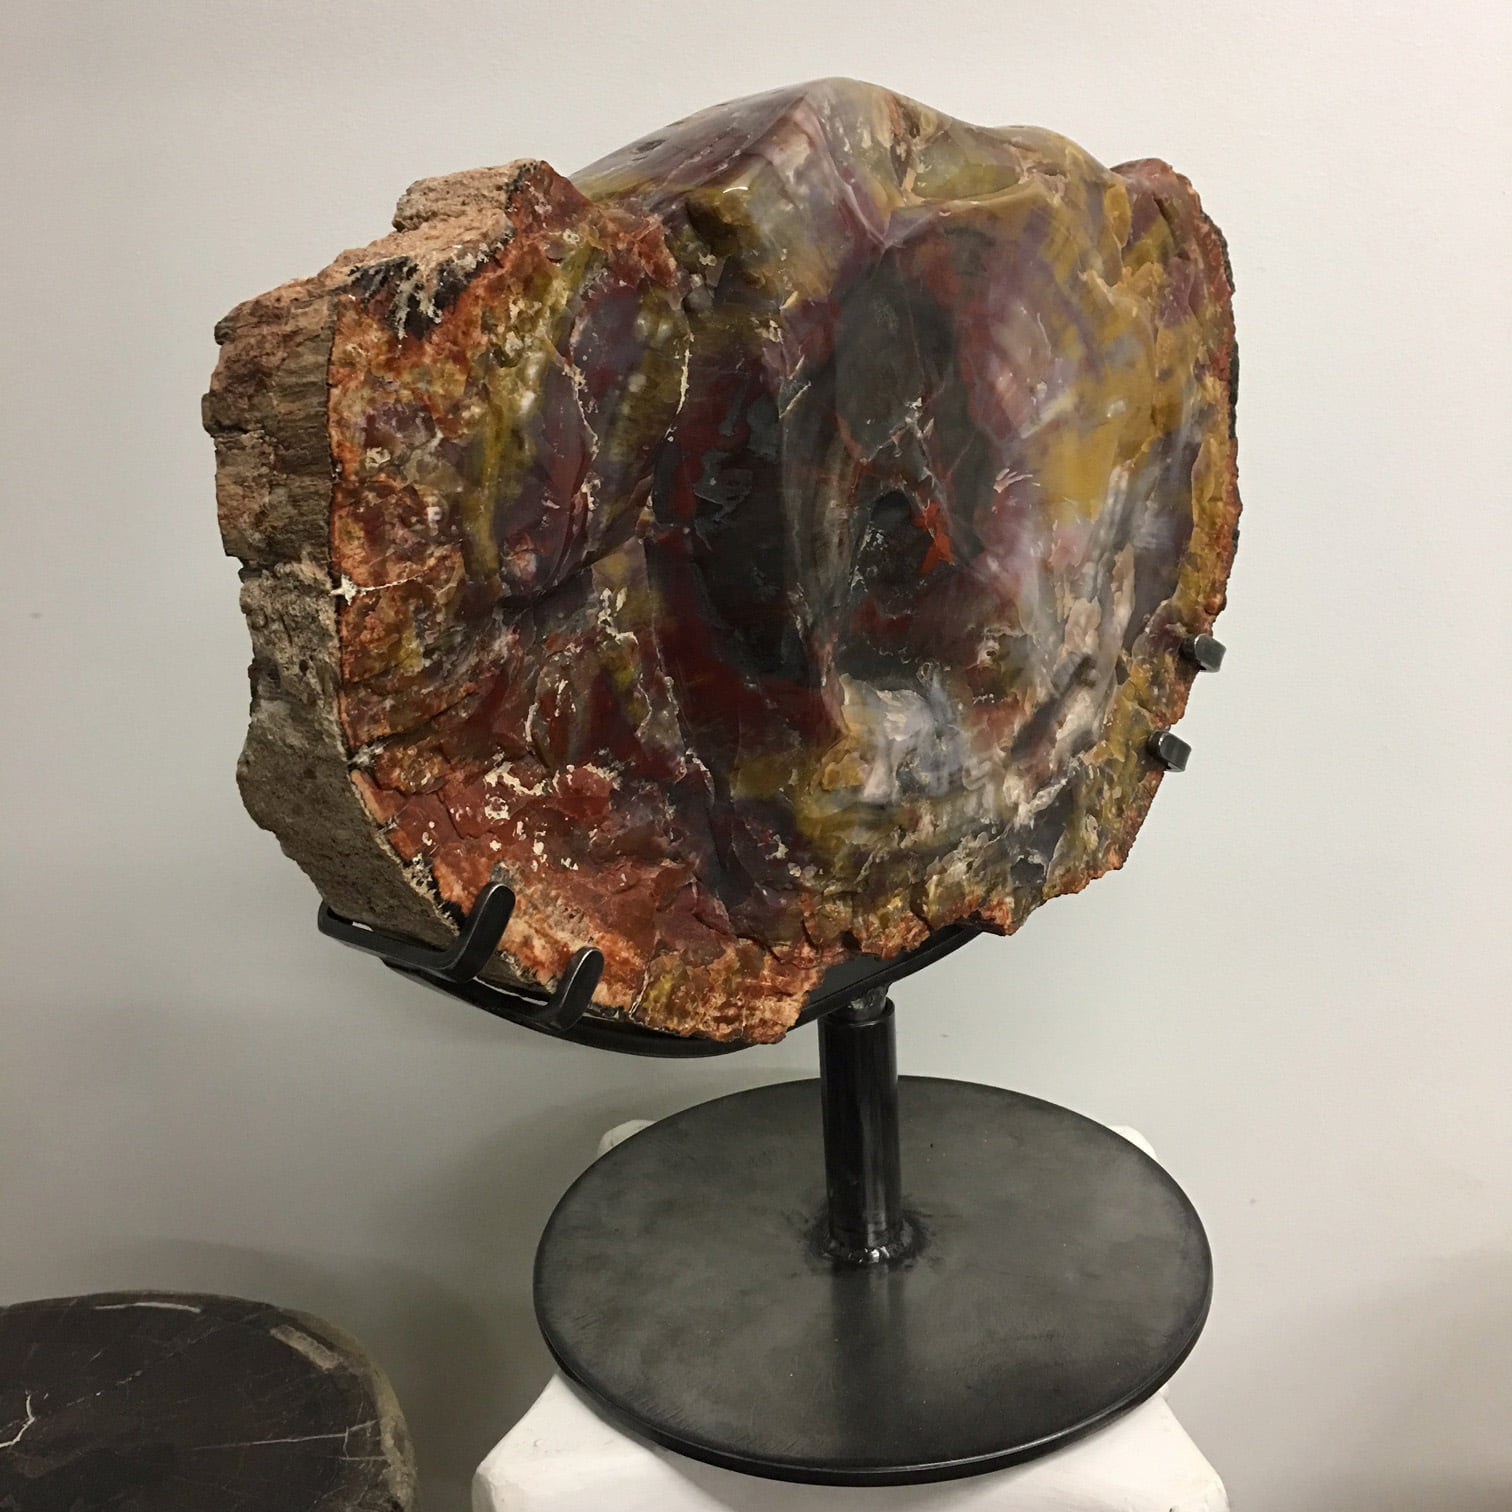 #A8 Museum Arizona Petrified Wood Sculpture Hand Polished On Both Sides - 40 Lbs Plus Rotating Stand